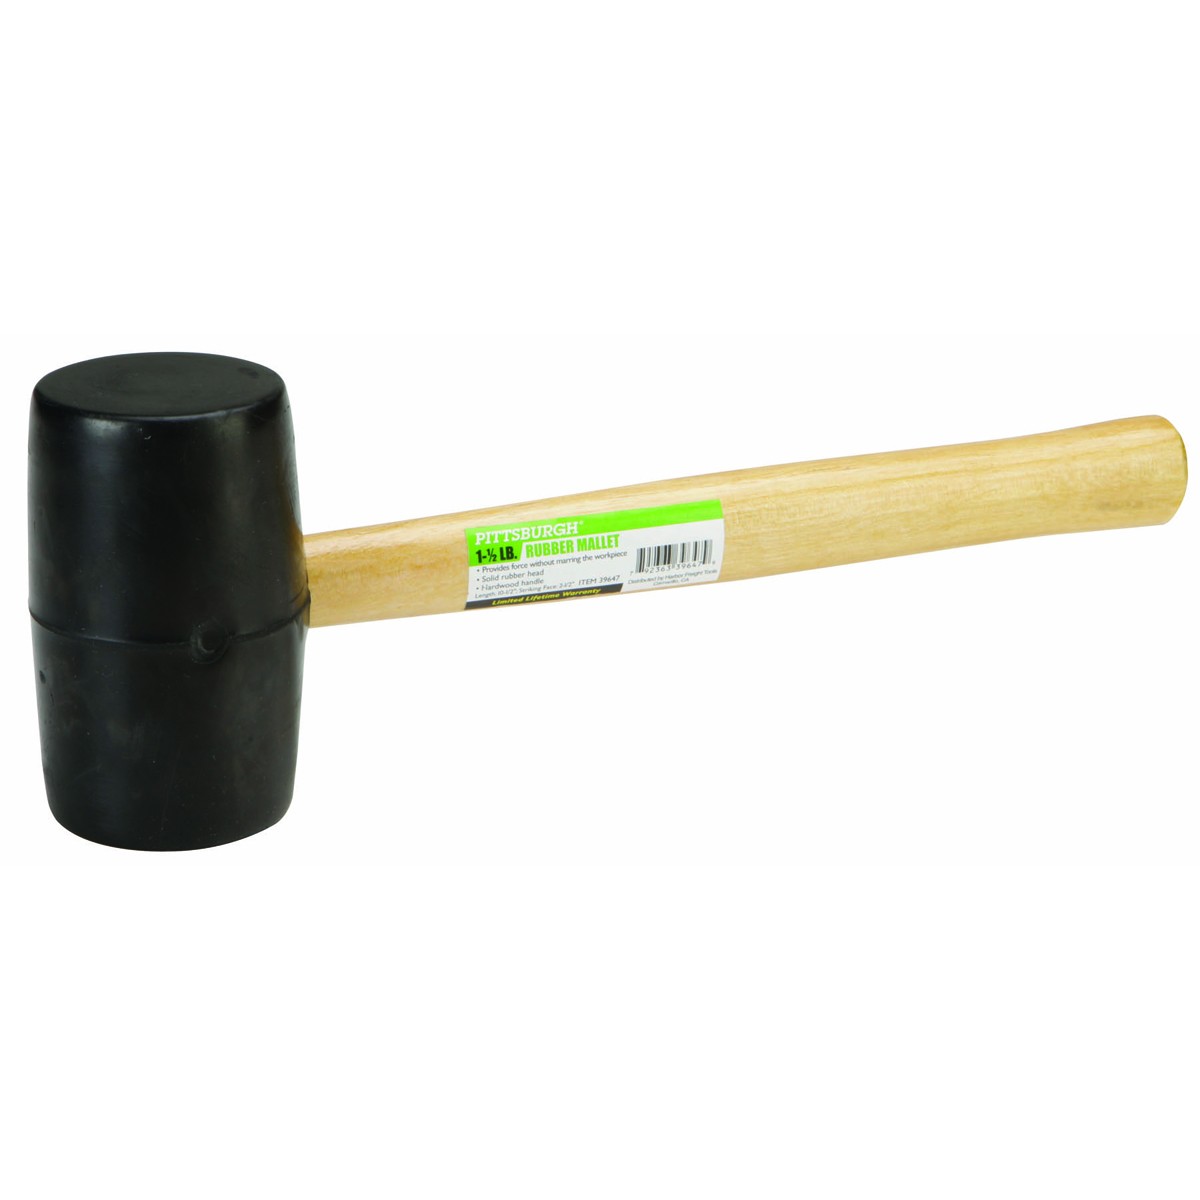 New   Pittsburgh  1-1/2 lb. Rubber Mallet